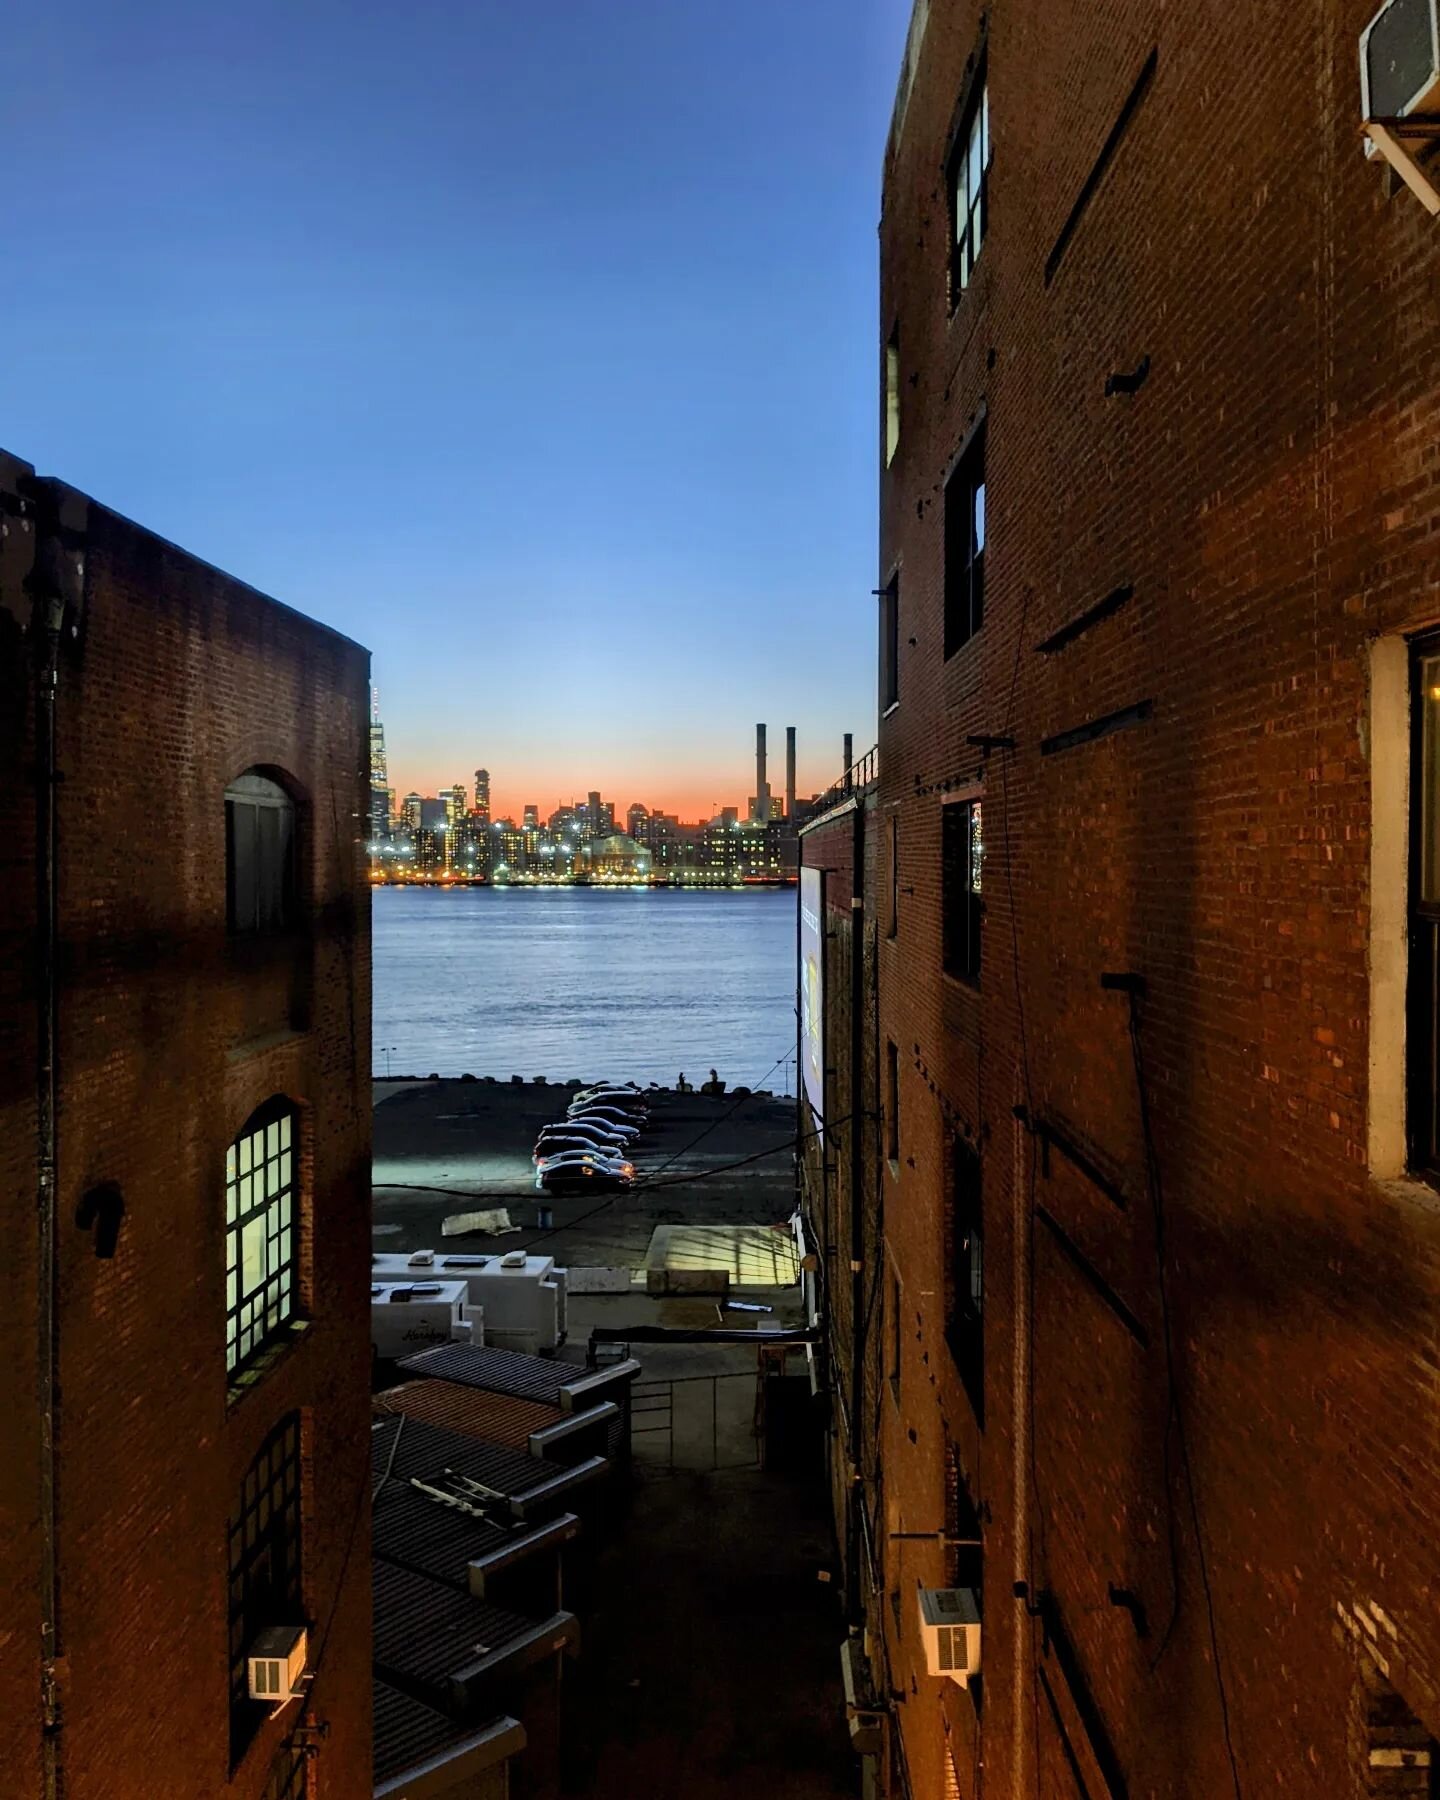 Peeping the views and drive-in movies, do you feel the walls closing in?

#Greenpoint #greenpointterminalwarehouse #pixelphotography #pixel3xl #brooklyn @skyline_drivein_nyc #freedomtower #eastriver